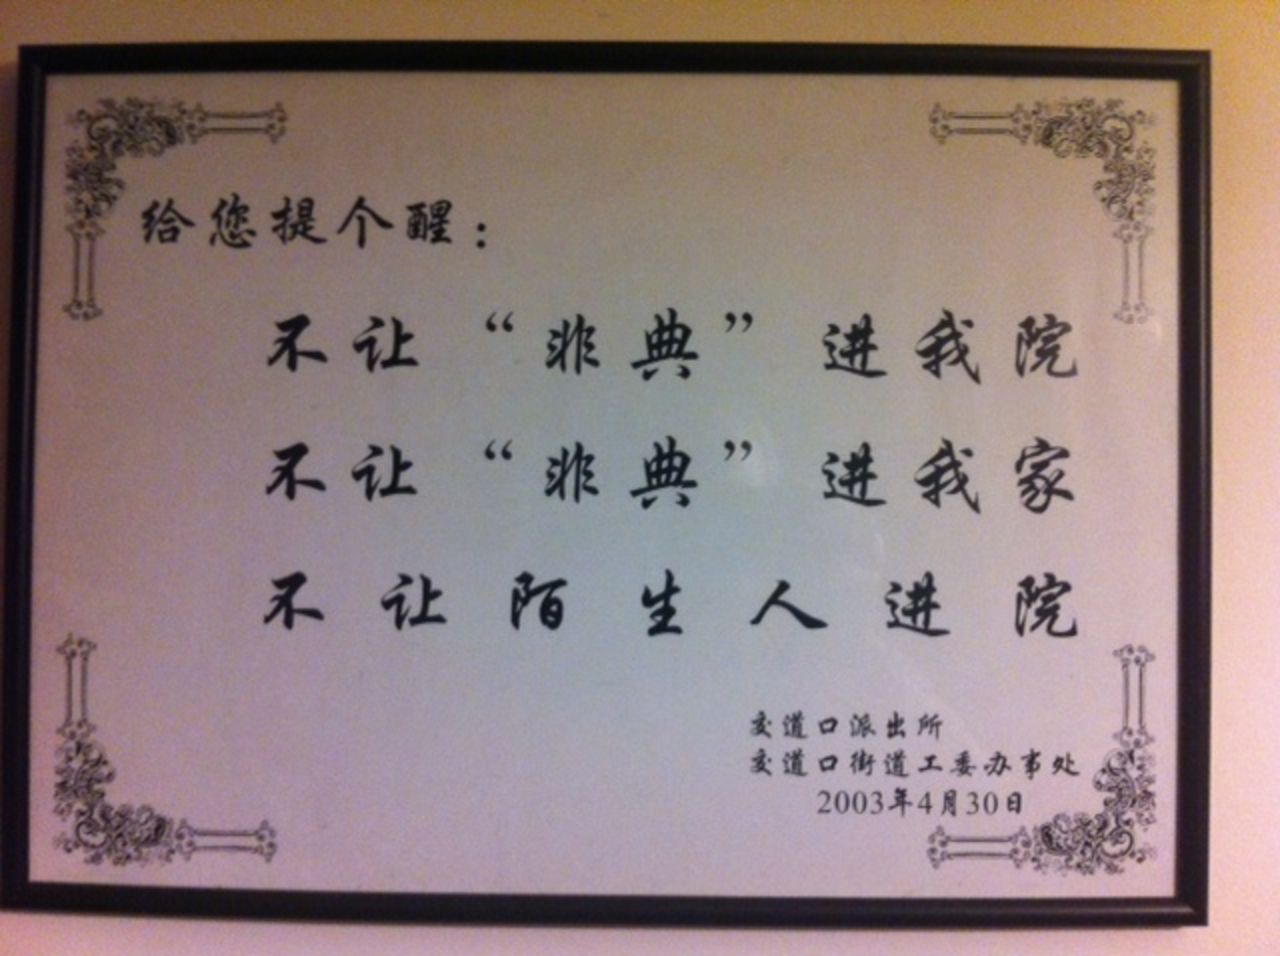 During the height of SARS in Beijing, crude posters like this hung in neighborhoods saying, "Don't let SARS or strangers into your house." The virus turned the Chinese capital and other Asian cities into ghost towns as residents stayed indoors. <br />Today, hotels such as the Kowloon Shangri-La in Hong Kong have trained teams of employees to regularly sanitize public areas and remain alert for related issues.